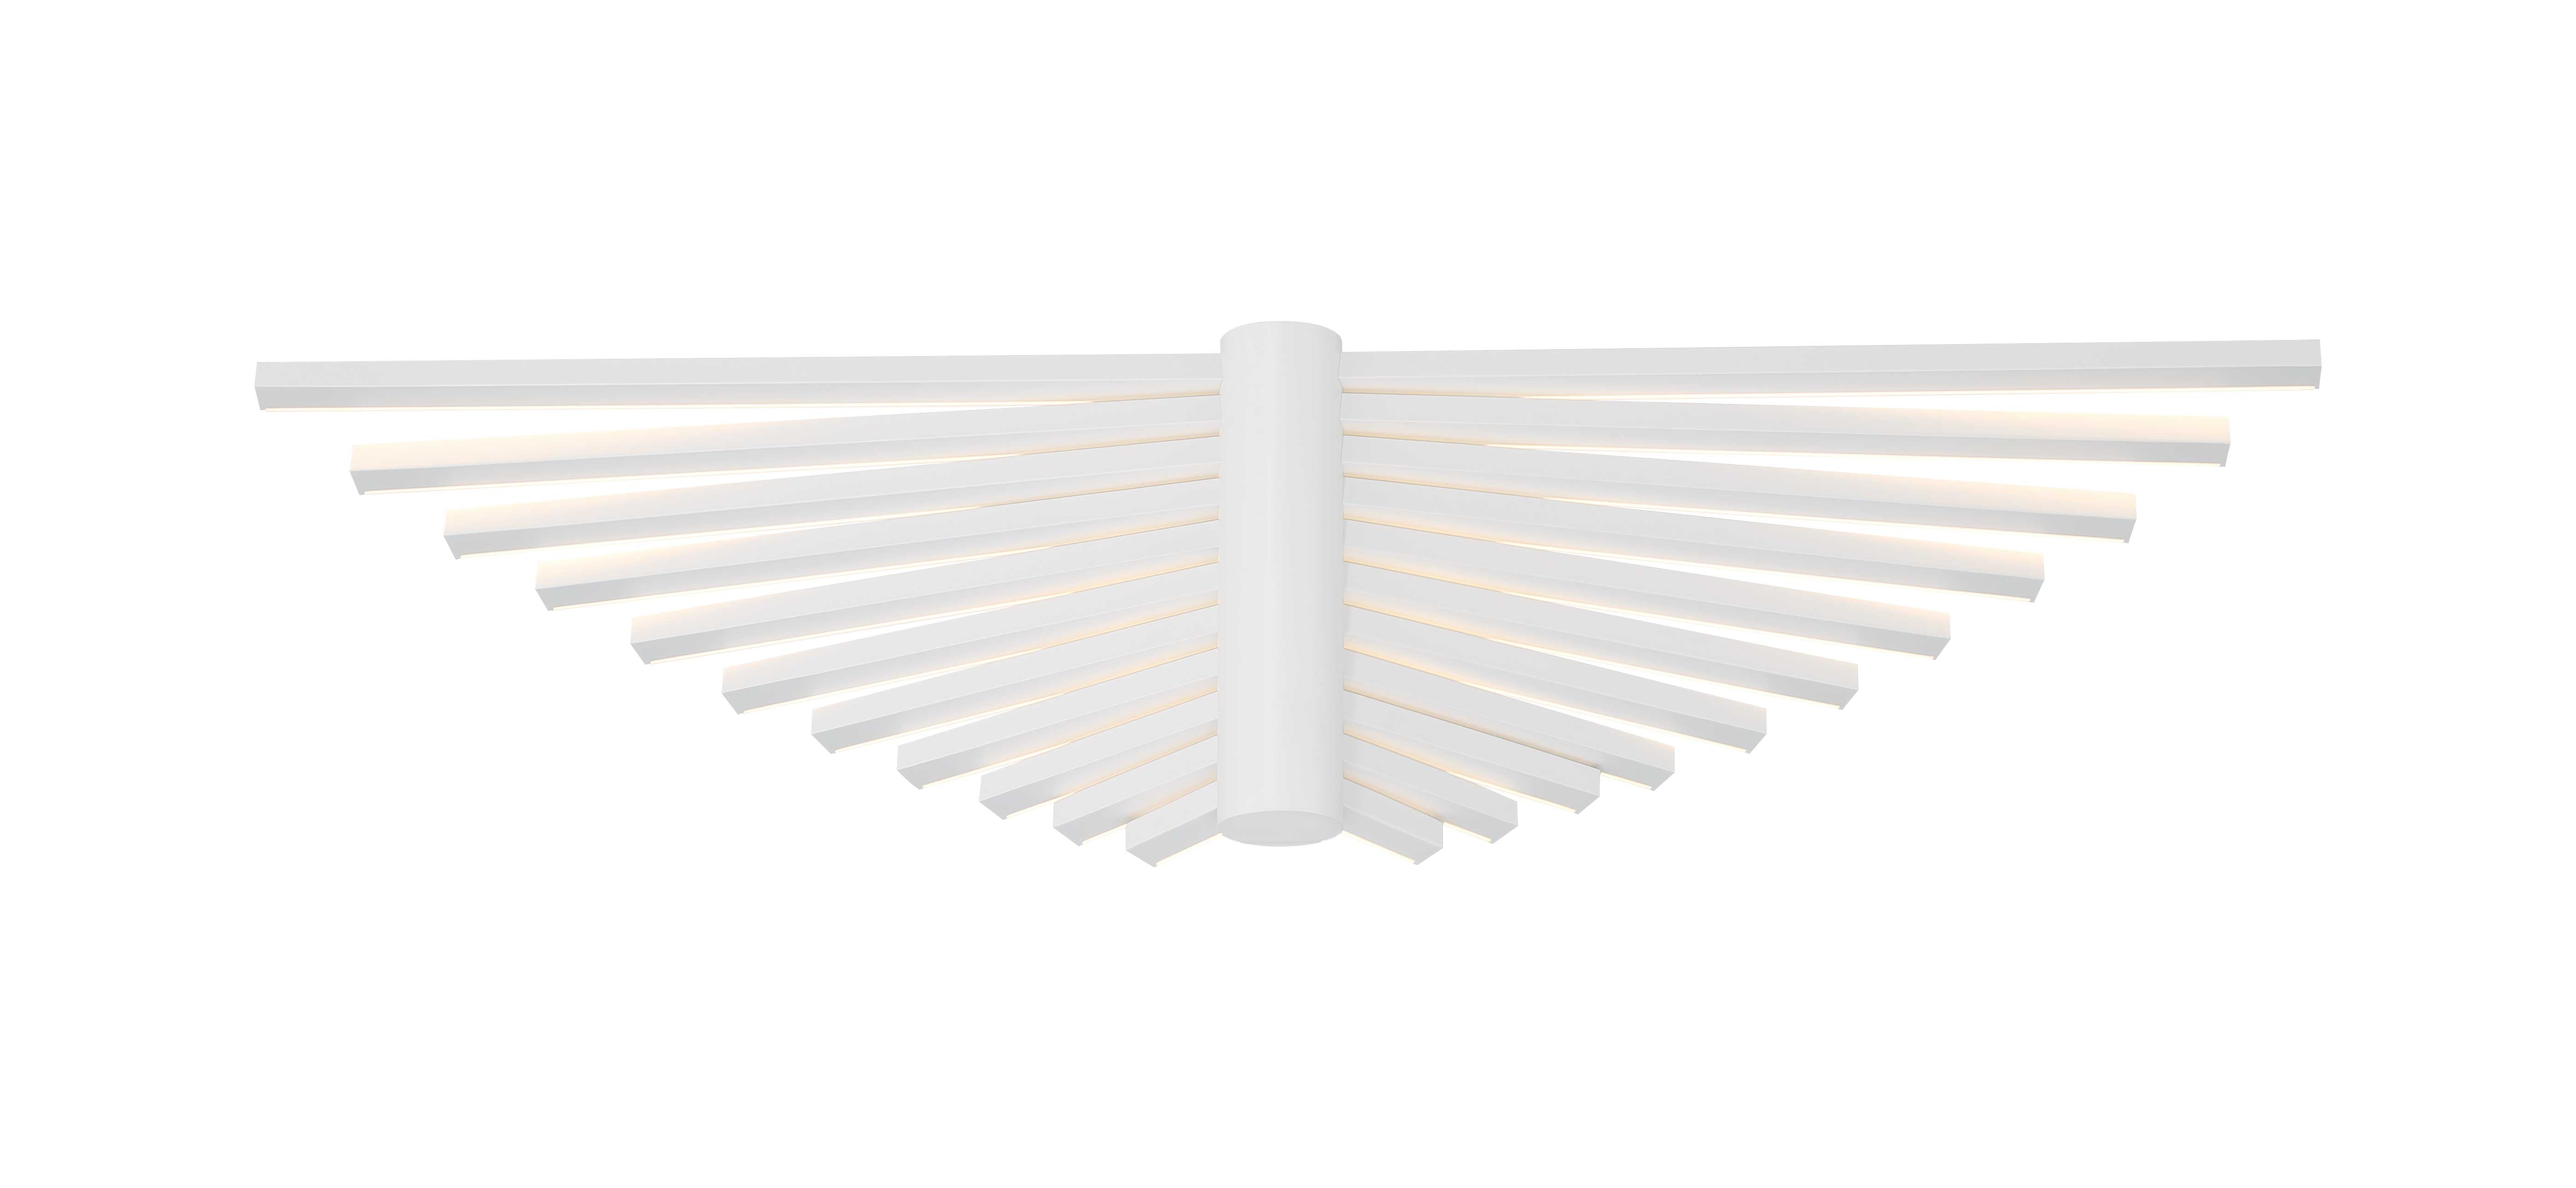 SERAPH Wall sconce White INTEGRATED LED - 46731-033 | EUROFASE